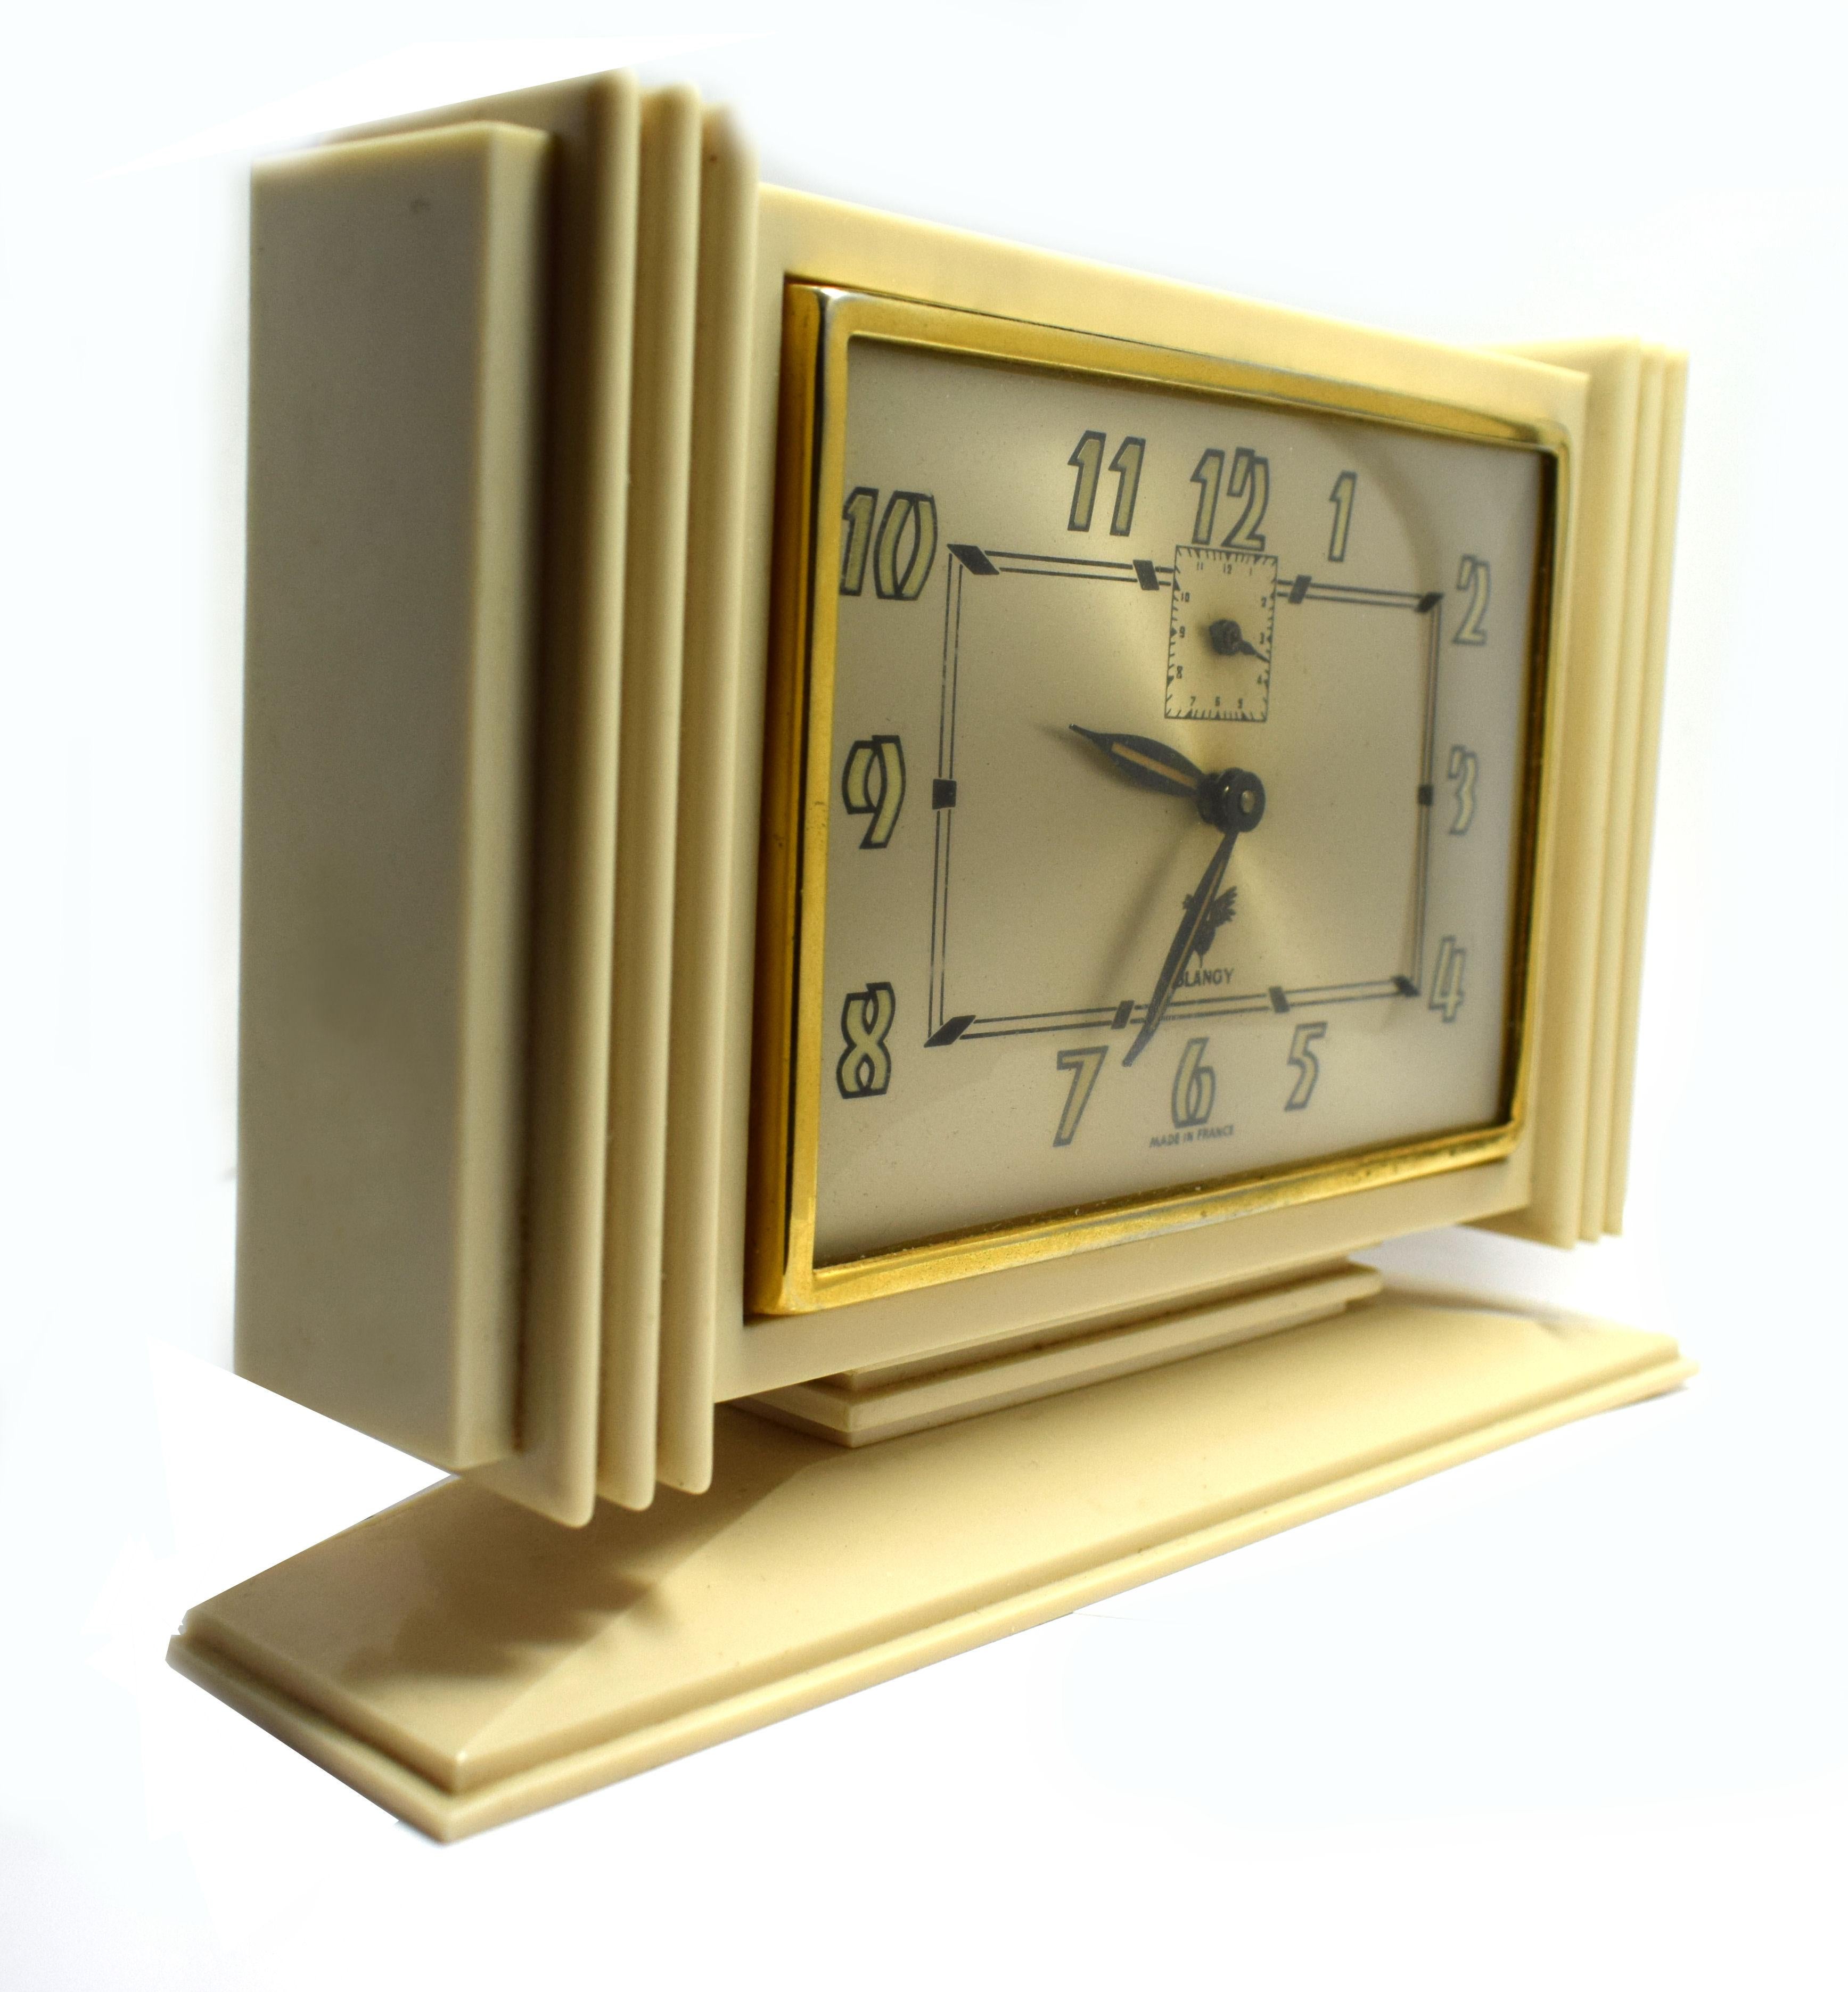 Original 1930s French Art Deco clock made by Blangy. Beautiful ivory colored Bakelite case with heavy Deco styling. A lovely Art Deco dial with brass bezel and very Deco numerals. Ideal size for mantle or desk /table areas. A rare find in excellent